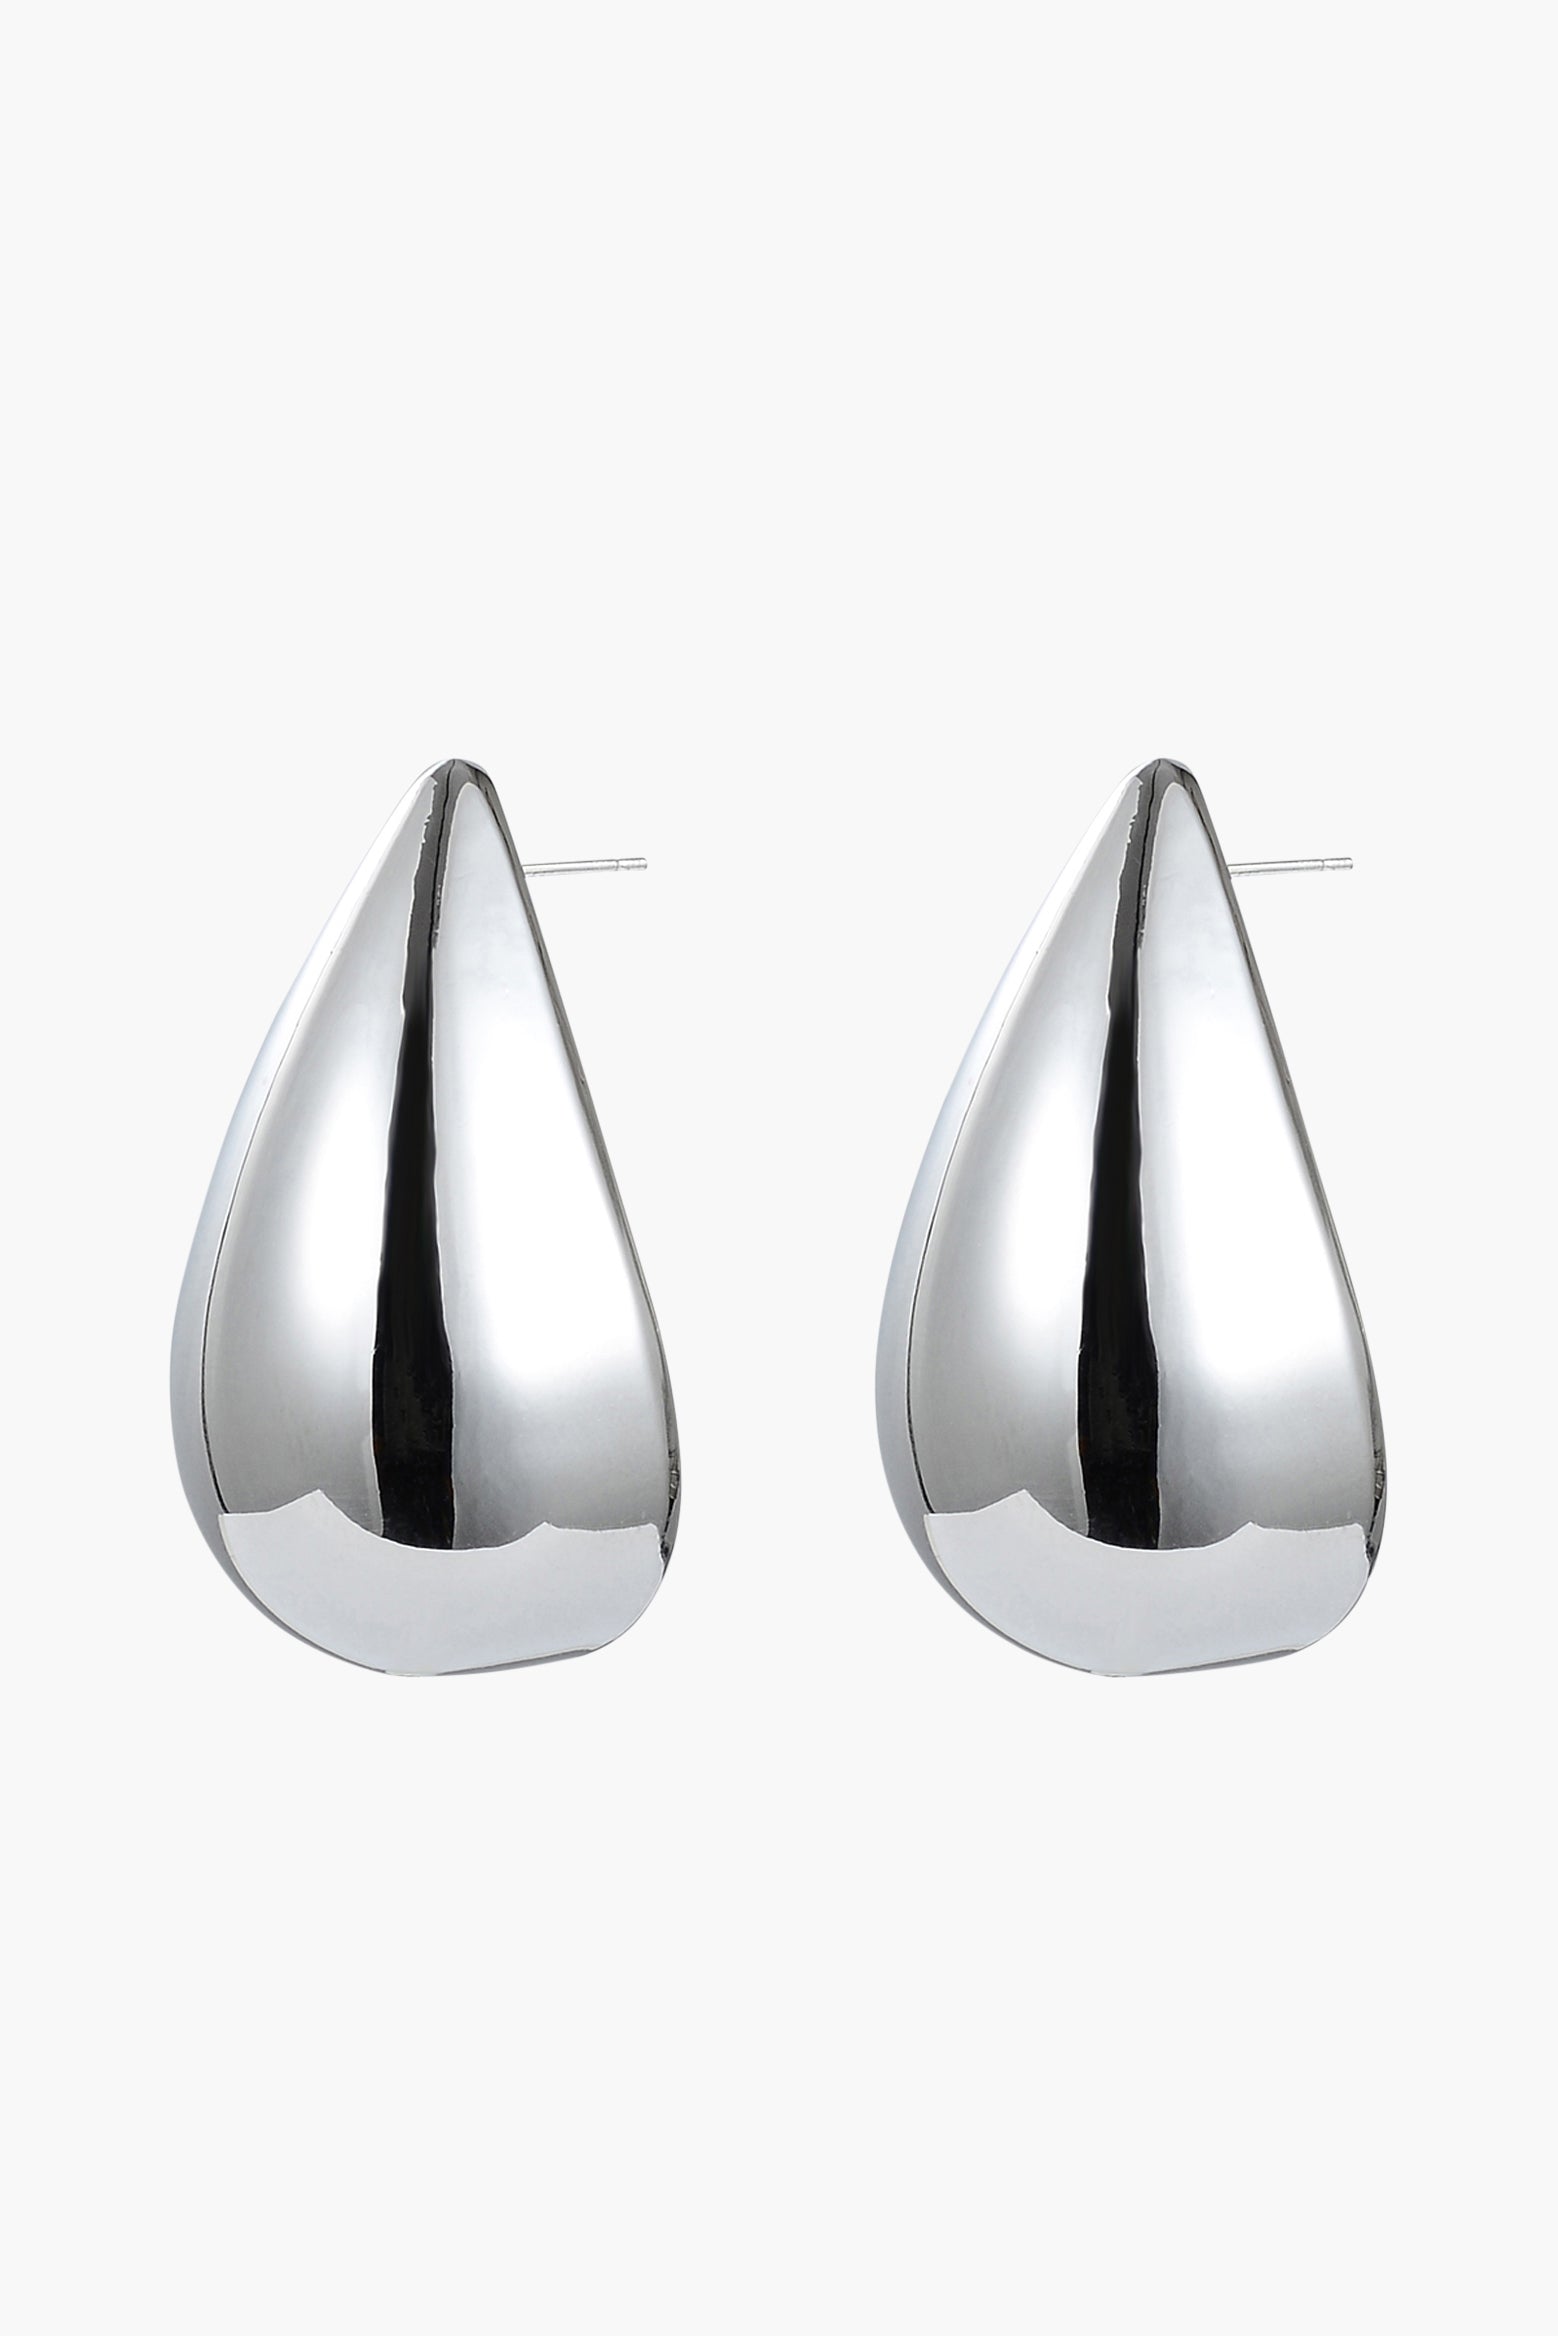 Anna Rossi Traffic Stopper Earring in Gunmetal available at TNT The New Trend Australia